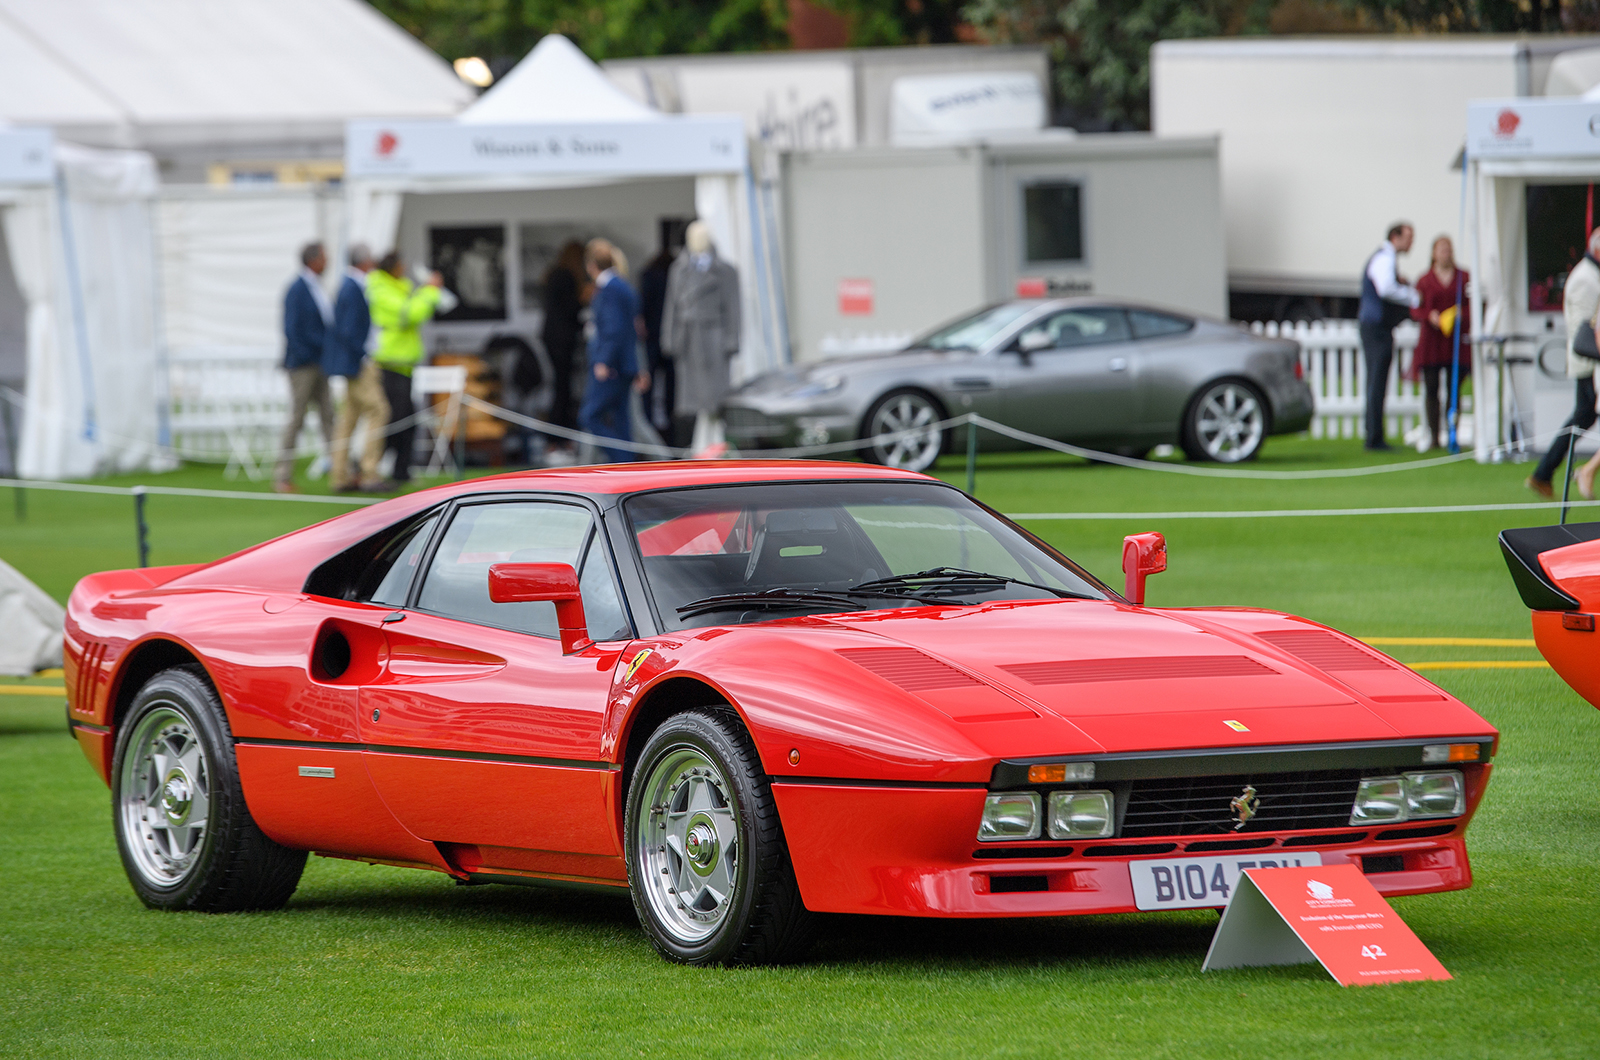 Classic & Sports Car – 10 Ferrari icons to dazzle at London Concours